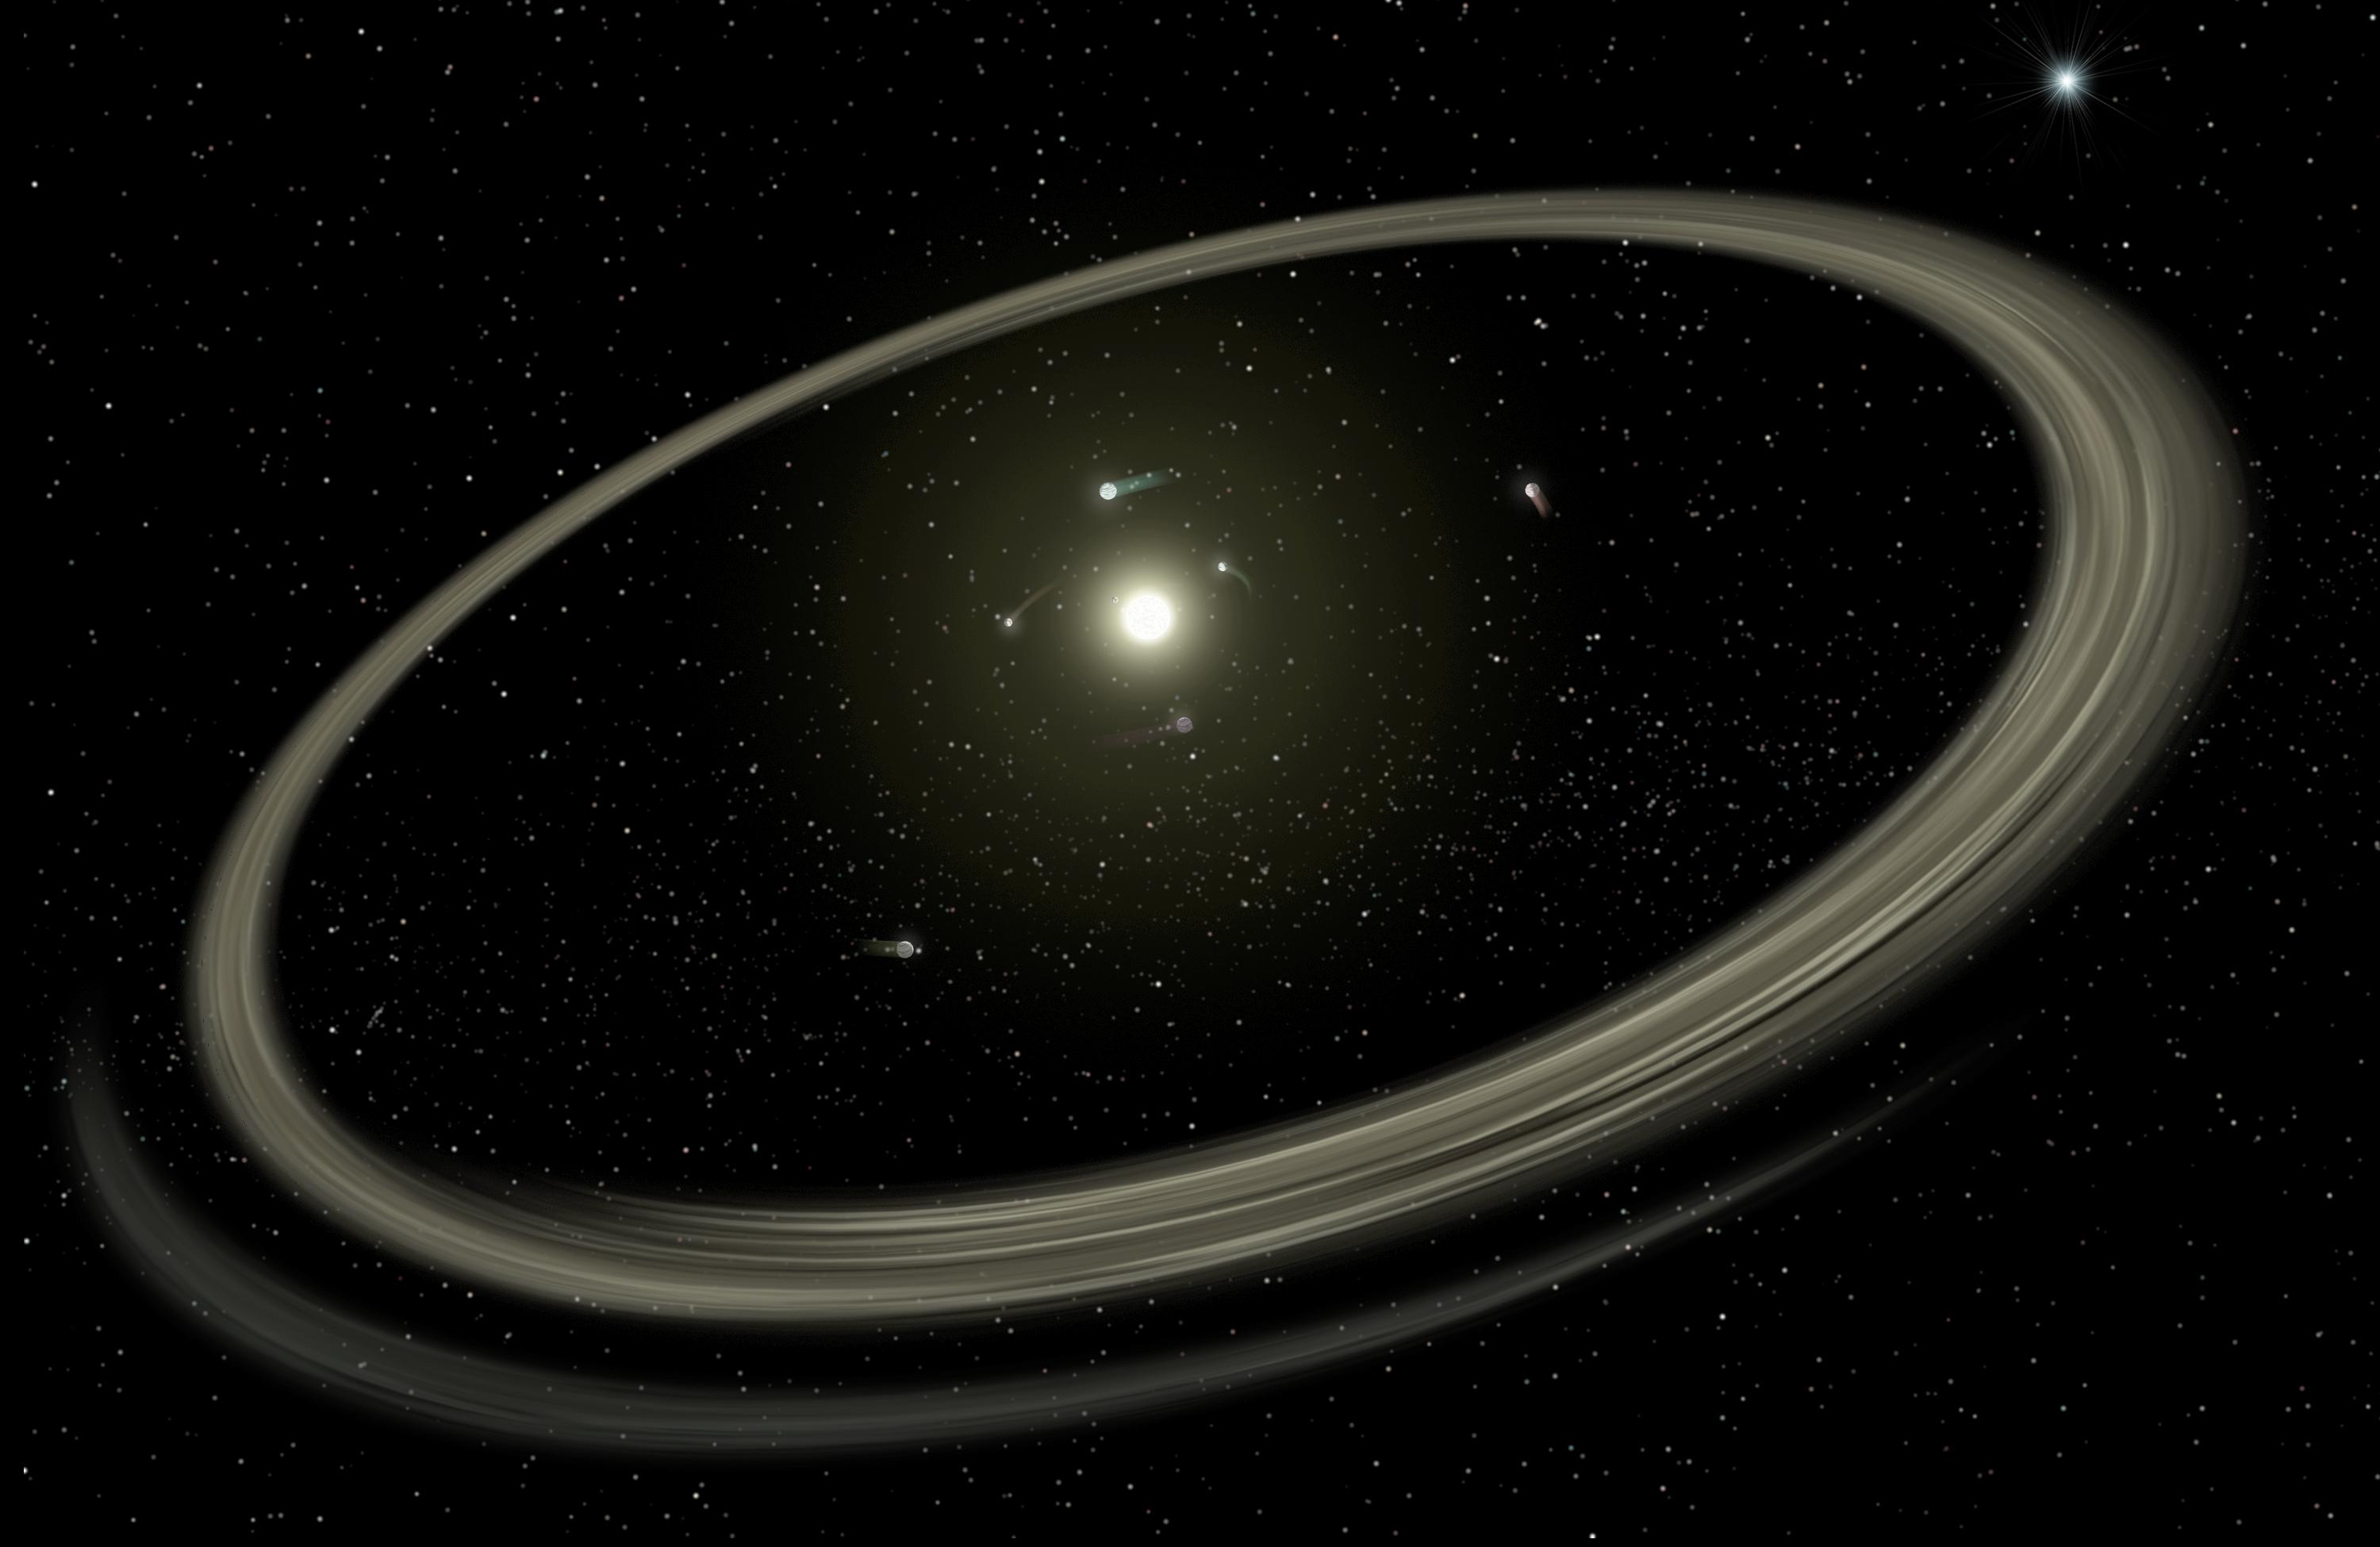 a start in the center of a dark sky surrounded by orbiting planets and a ring of dust